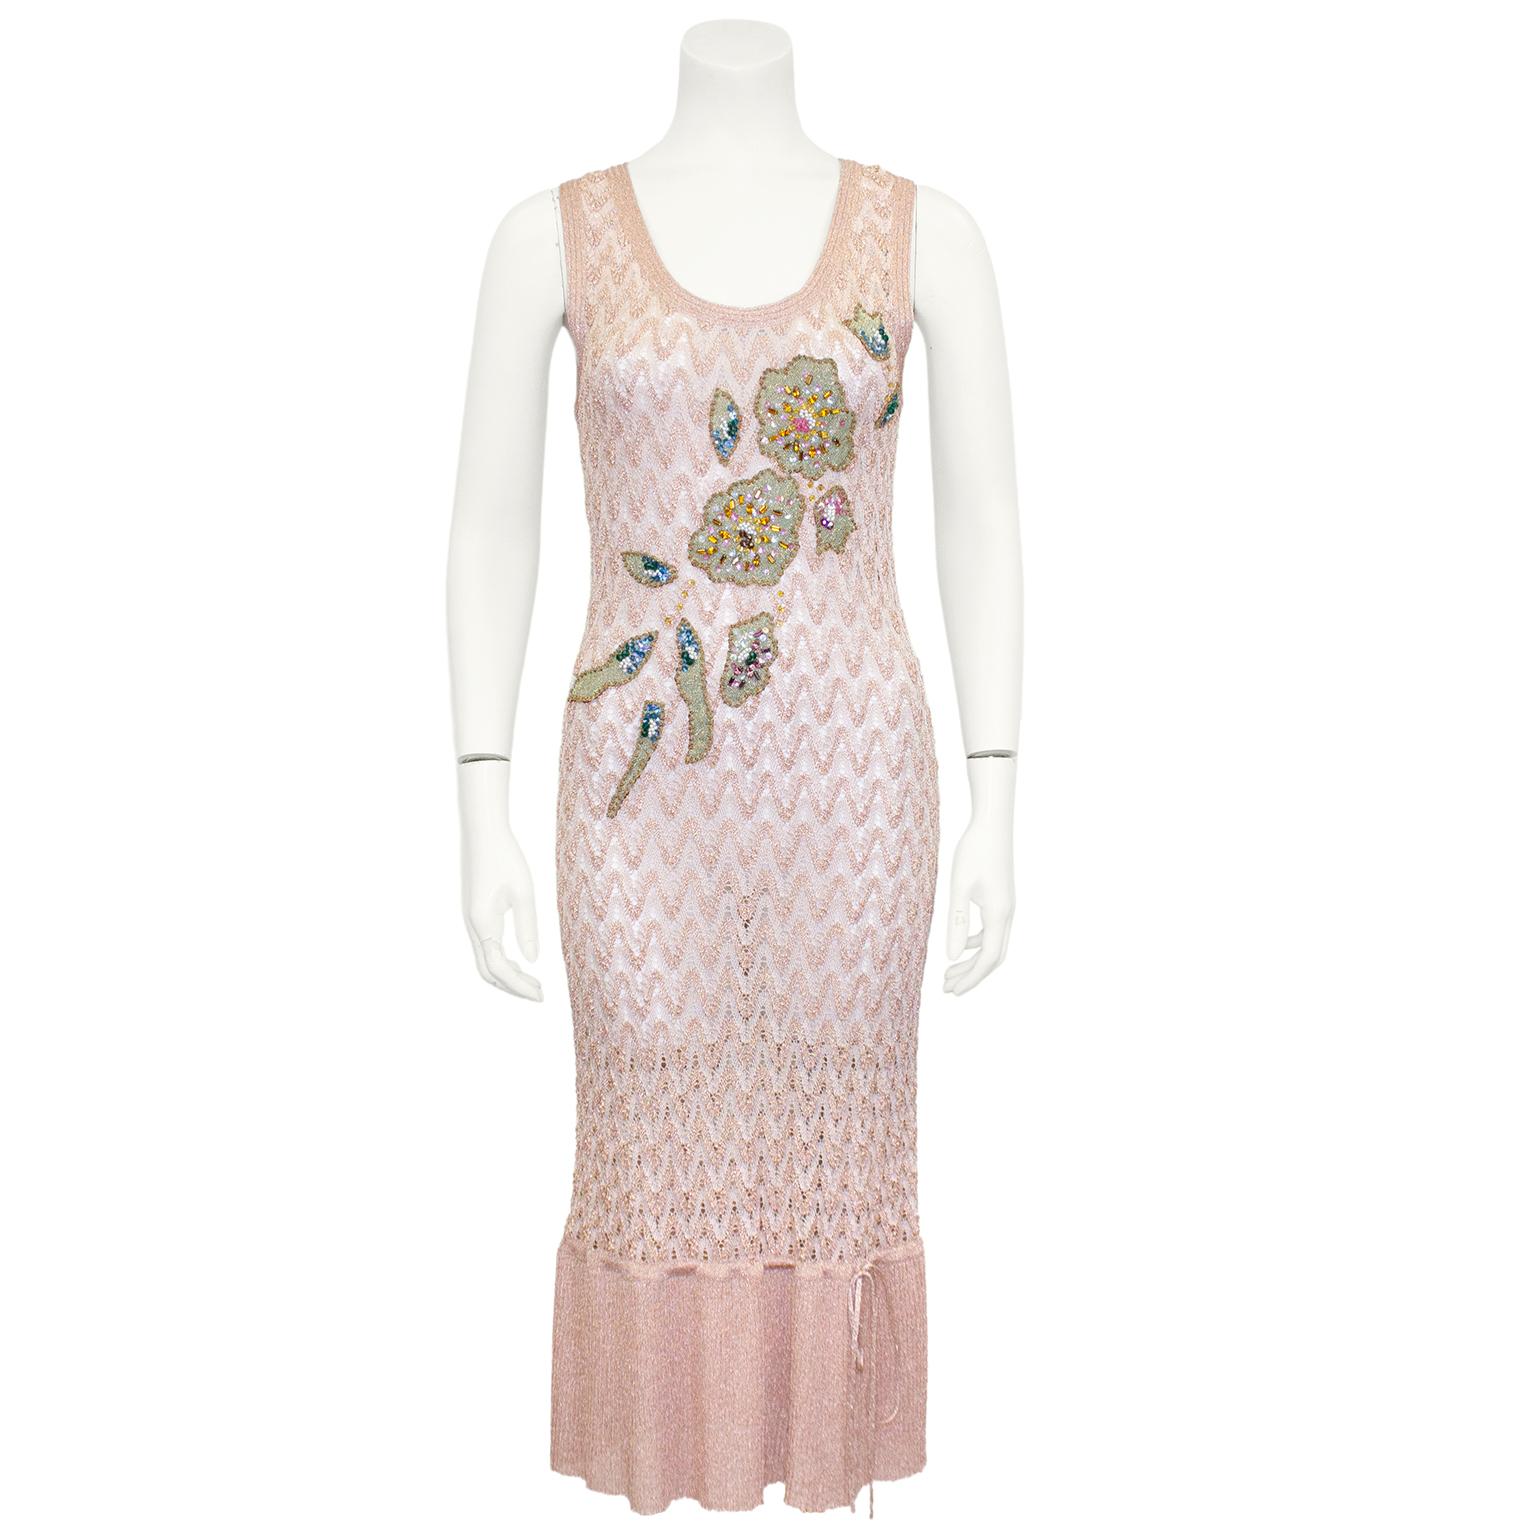 Stunning Missoni metallic blush pink knit chevron dress and cardigan set from the 1990s. Dress is bodycon and sleeveless with round neckline and 8